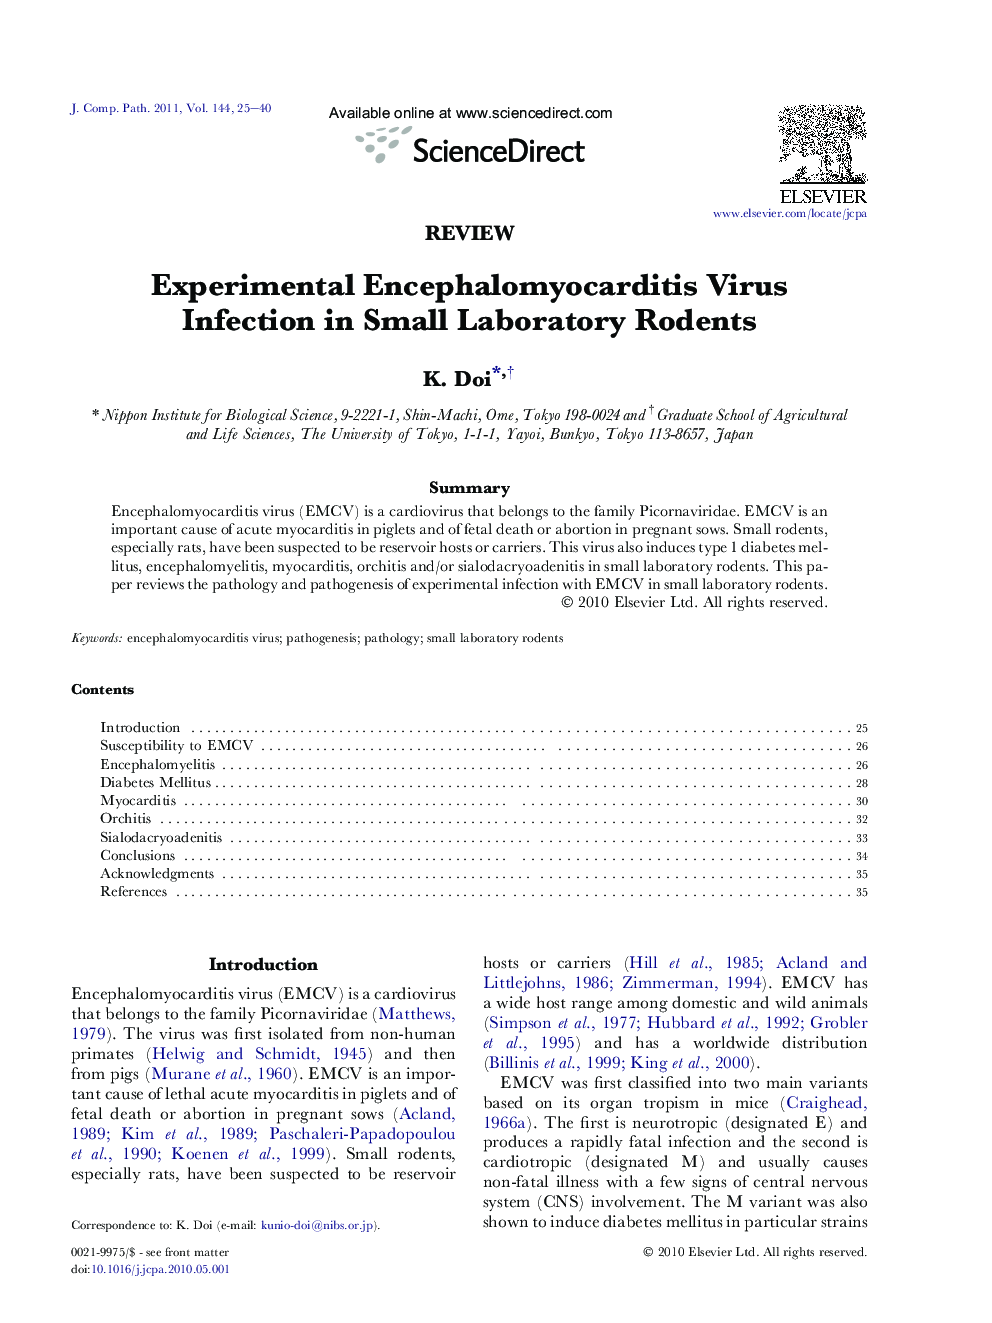 Experimental Encephalomyocarditis Virus Infection in Small Laboratory Rodents